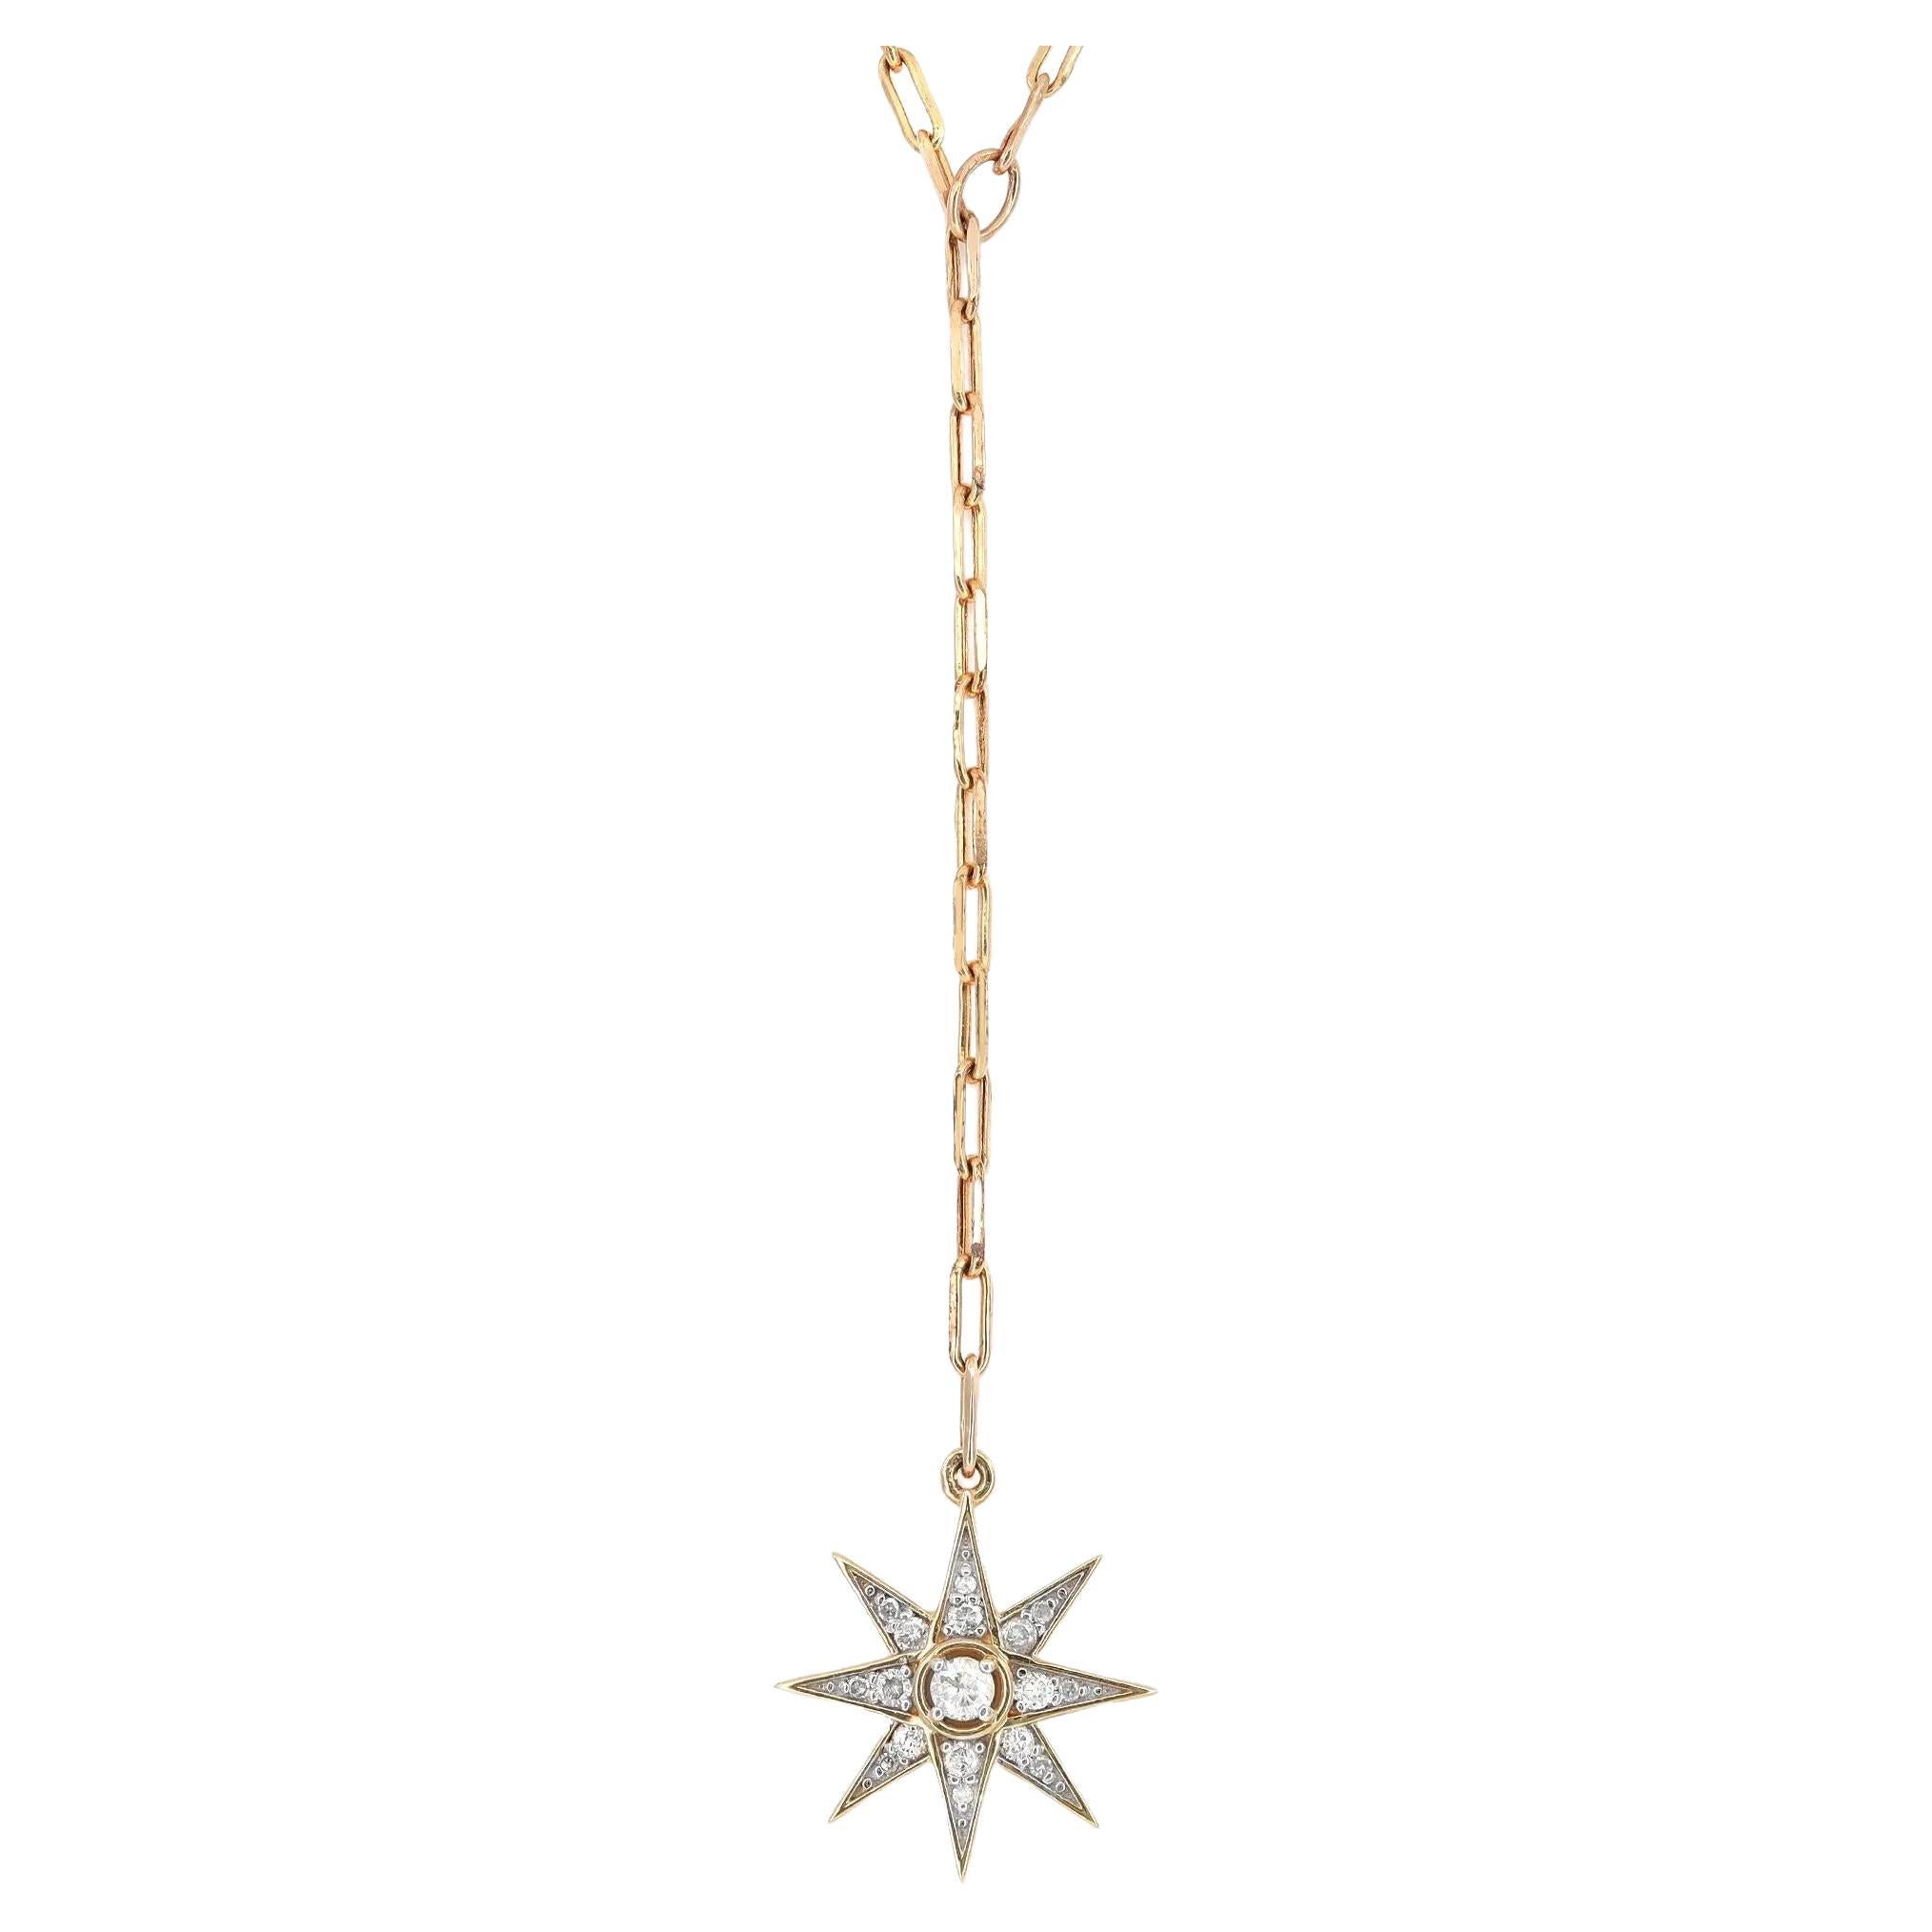 So dainty and pretty that we know it will look wonderful for any occasion. Crafted in 14K Yellow Gold. This beautiful diamond lariat necklace features a link chain with a diamond-studded star drop. Total diamond weight: 0.16 carat. Diamond color I